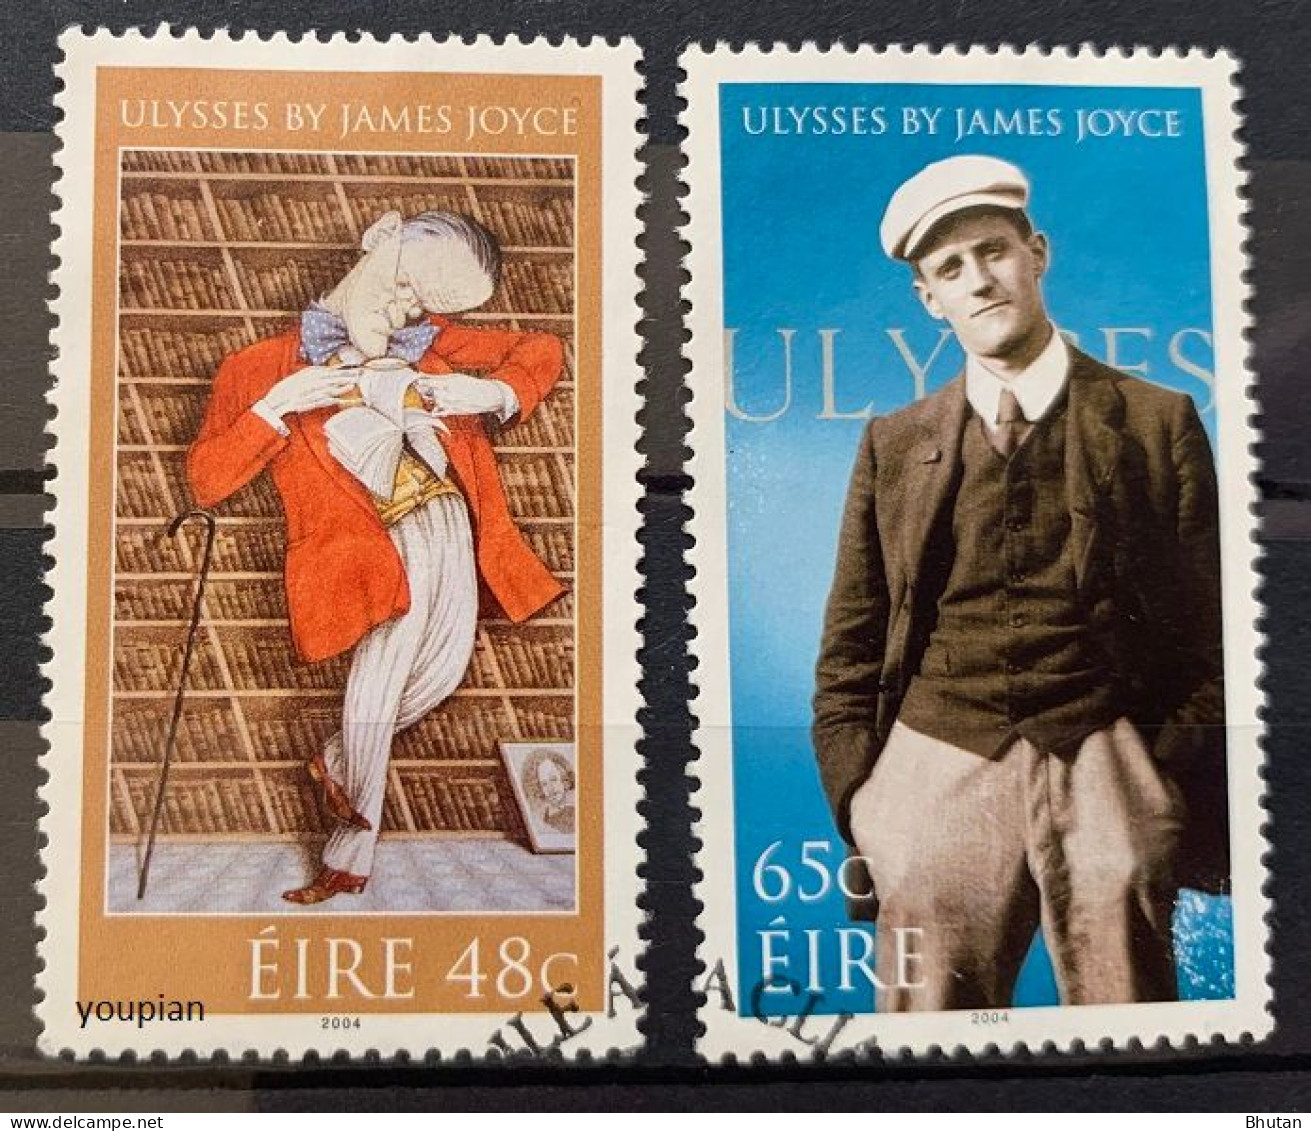 Ireland 2004, Tullio Pericoli Of Ulysses & Bloomsday, Cancelled Stamps Set - Used Stamps